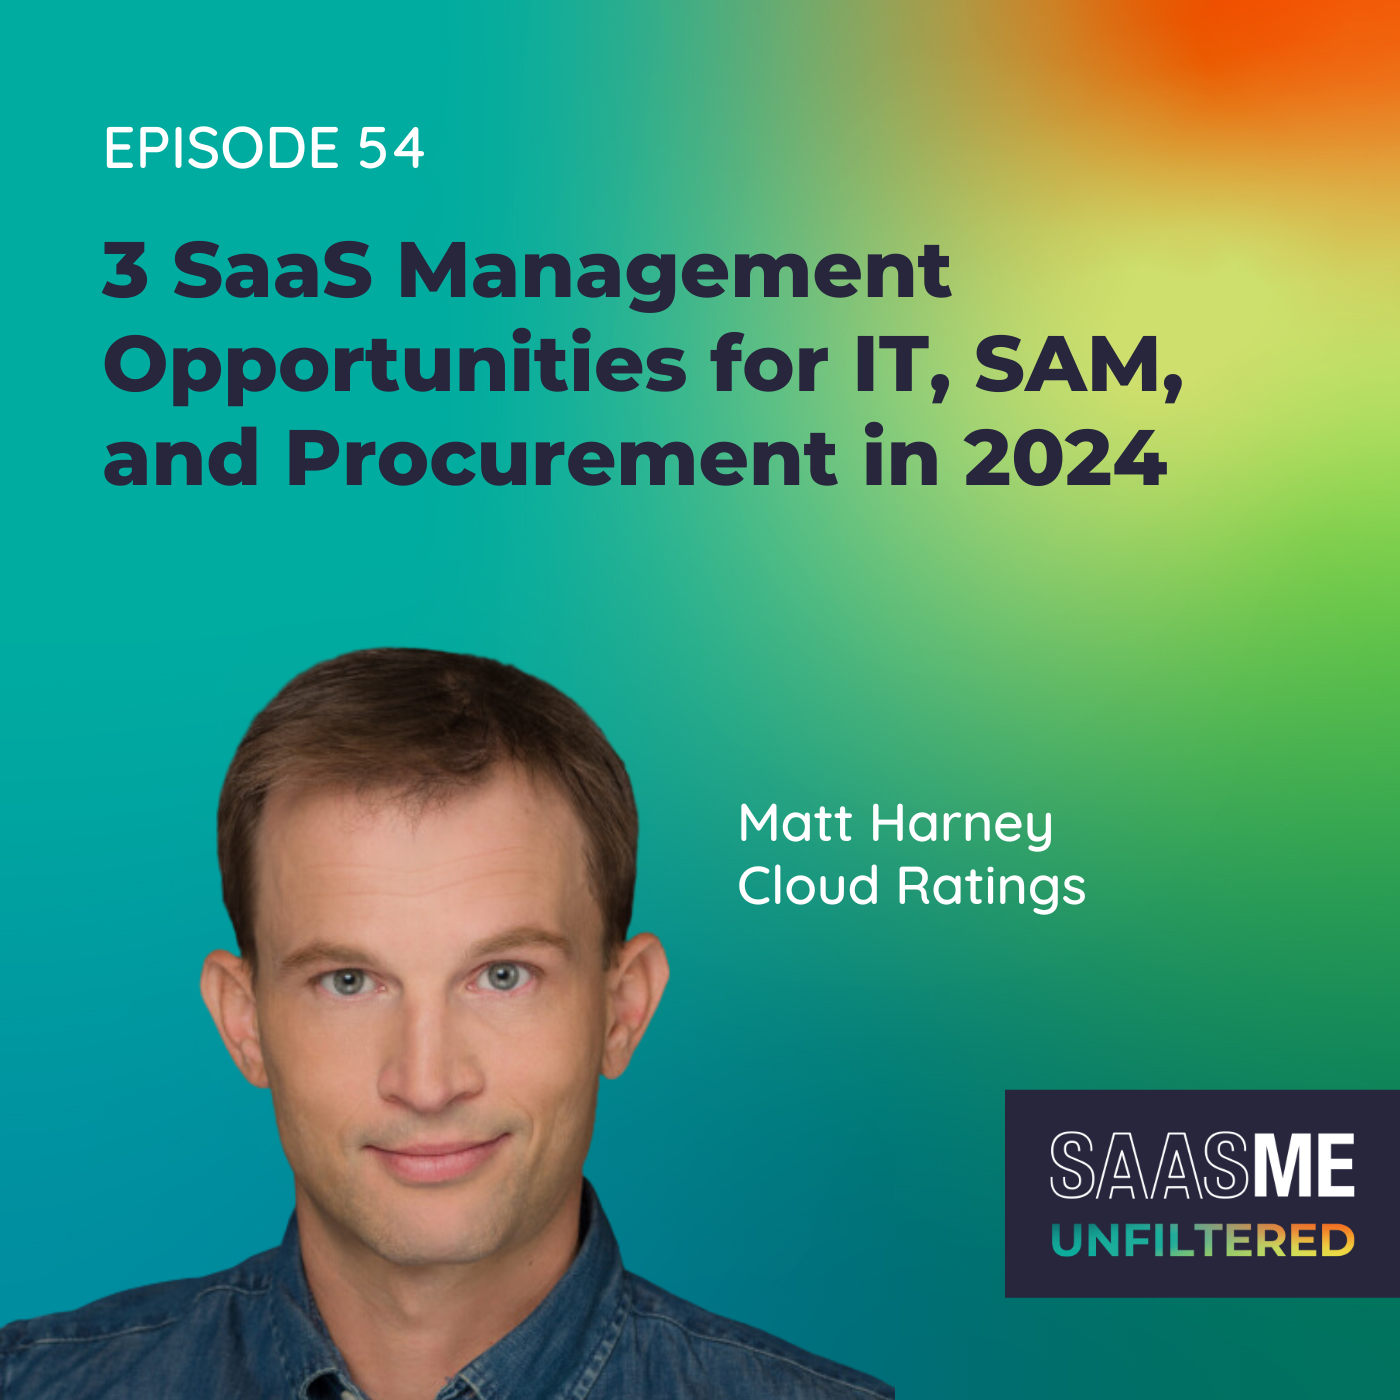 3 SaaS Management Opportunities for 2024 with Matt Harney (Cloud Ratings)